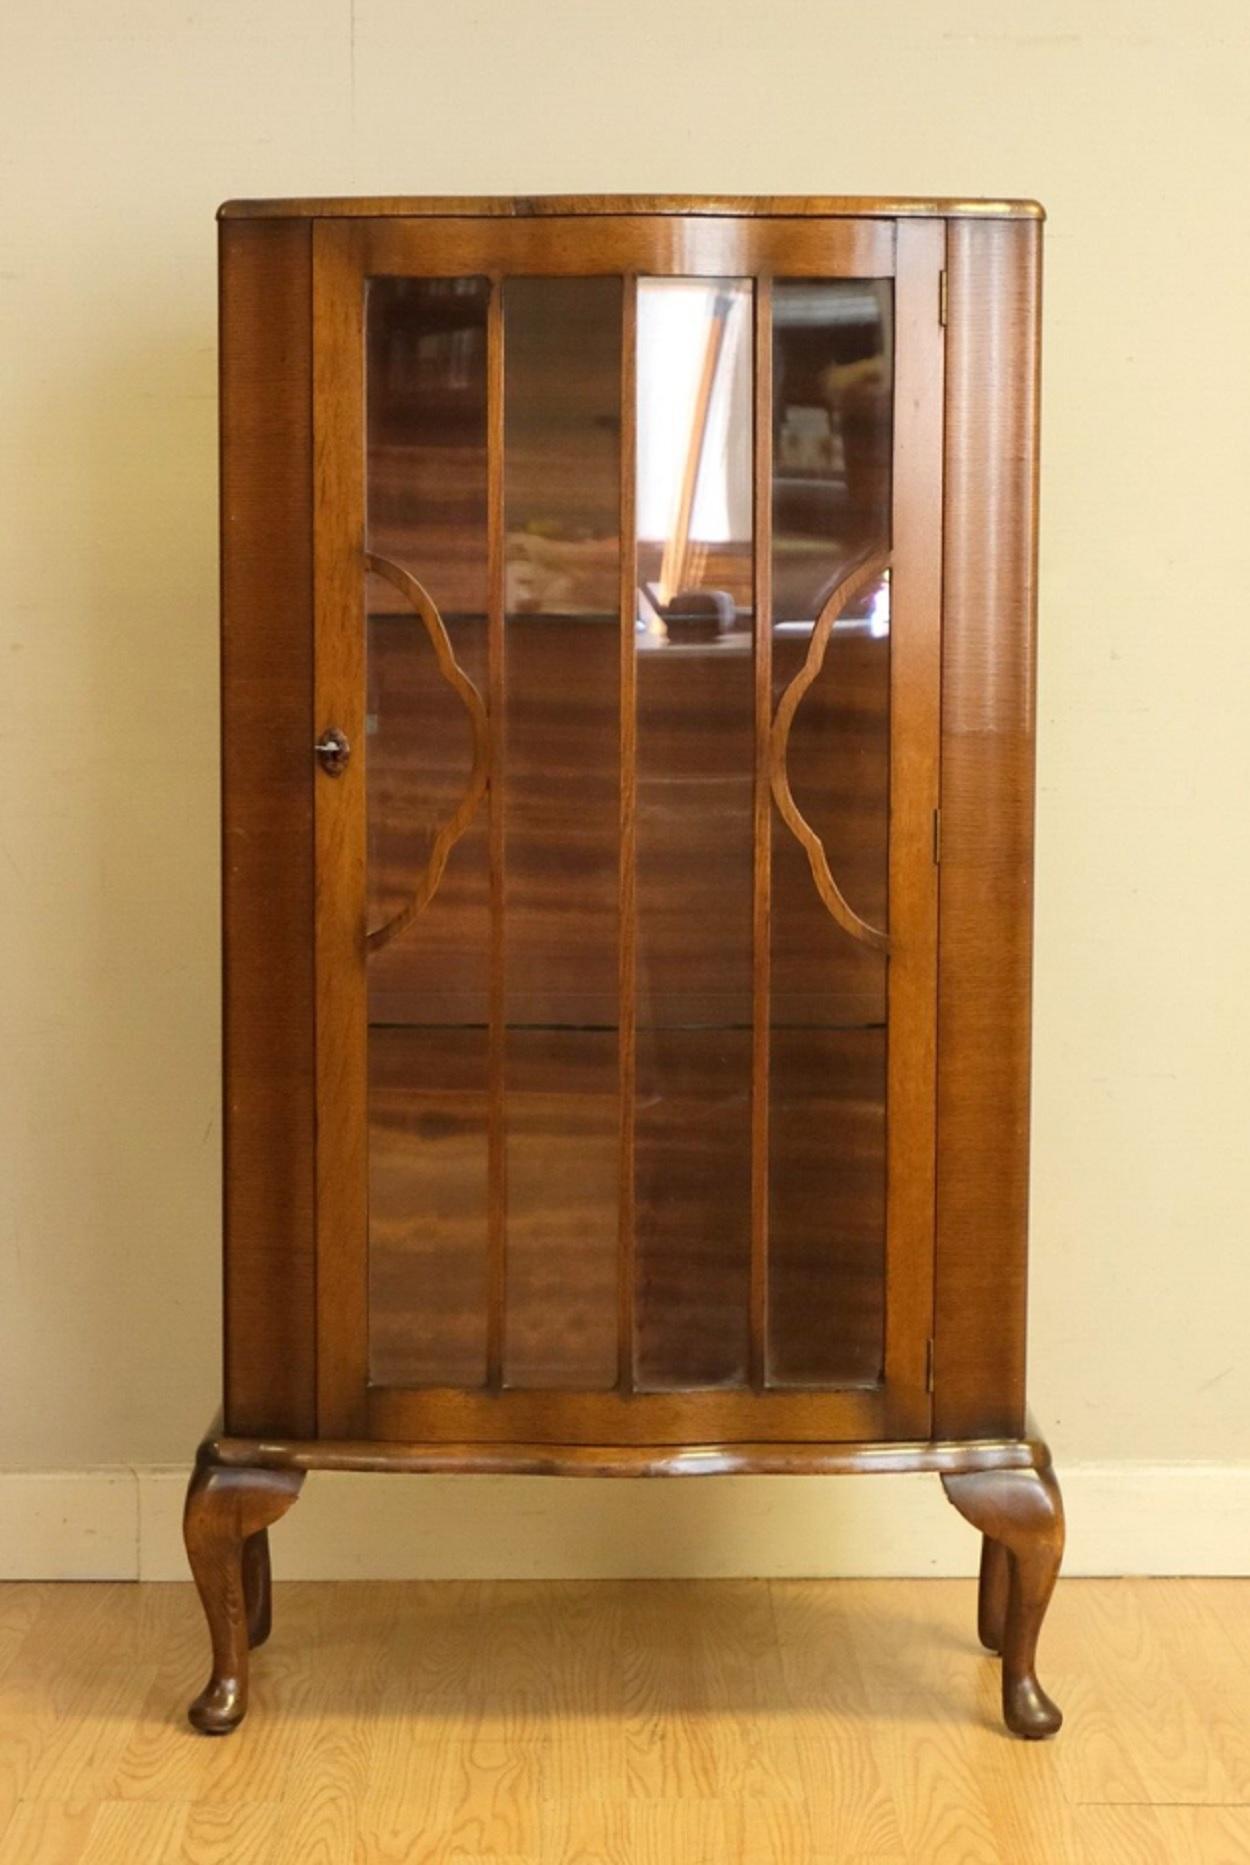 We are delighted to offer for sale this gorgeous display cabinet with a glassed front door and a pair of glass shelves.

This small and pretty display cabinet is presented with serpentine front, Queen Ann style legs and a pair of glass shelves. The